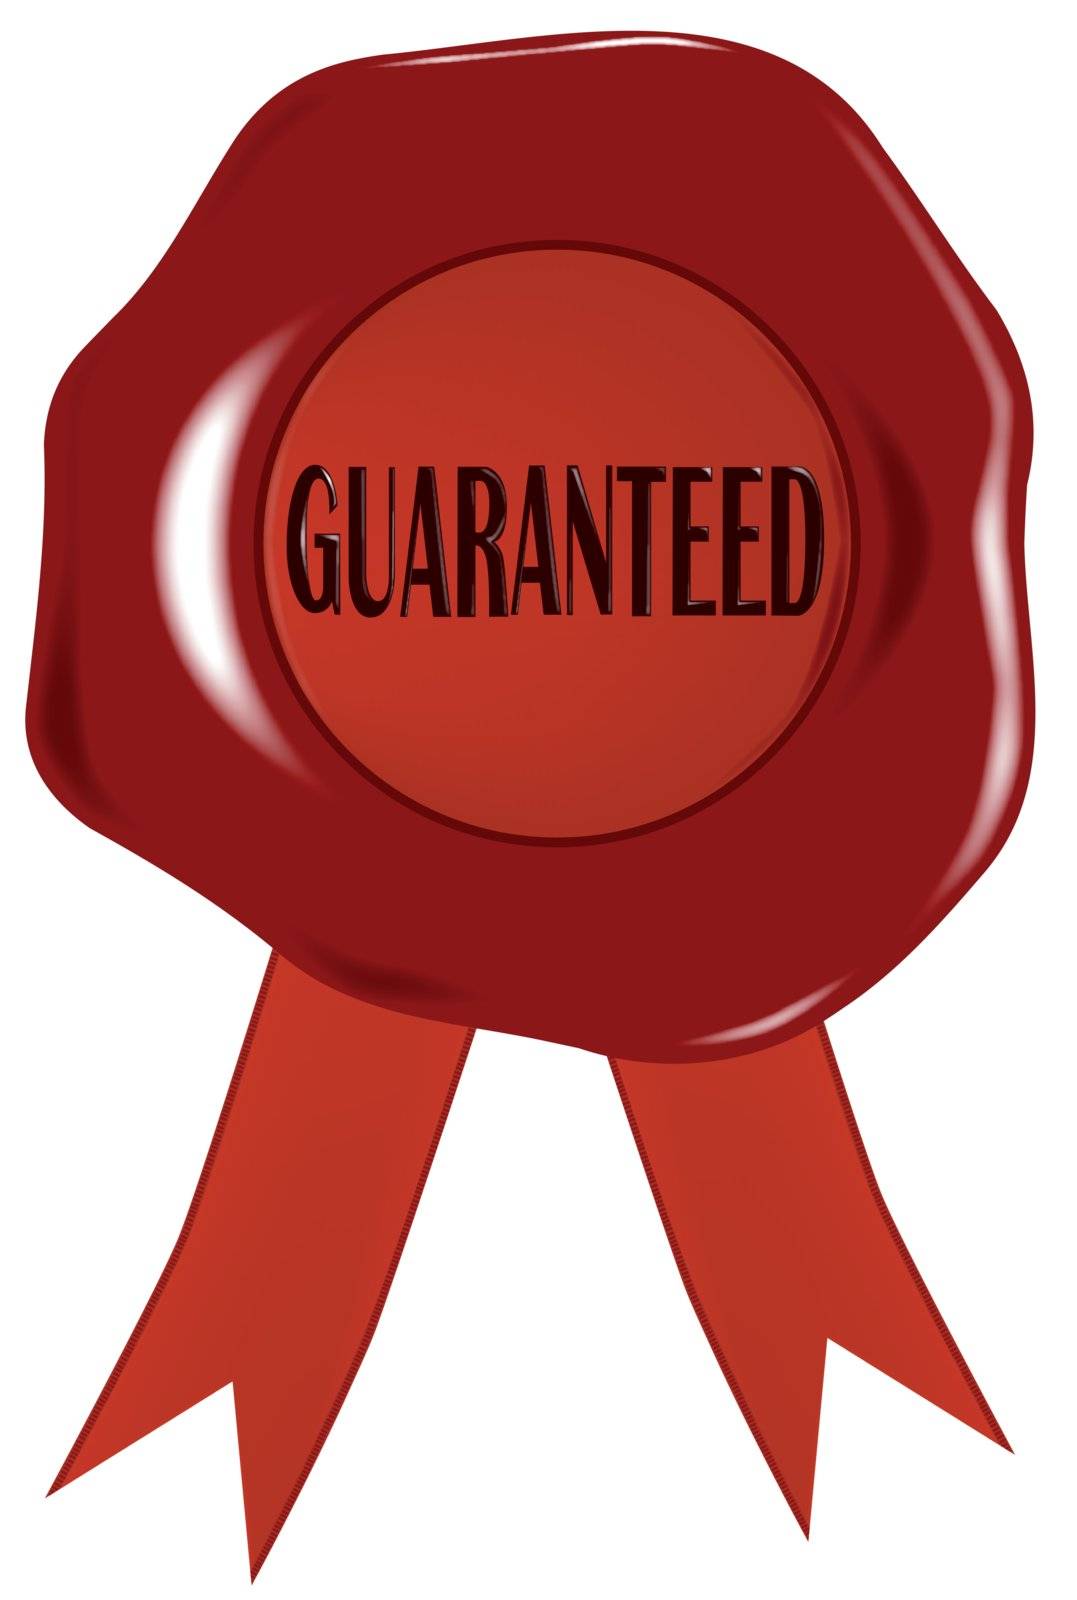 A wax seal with the word 'GUARANTEED' embosed.